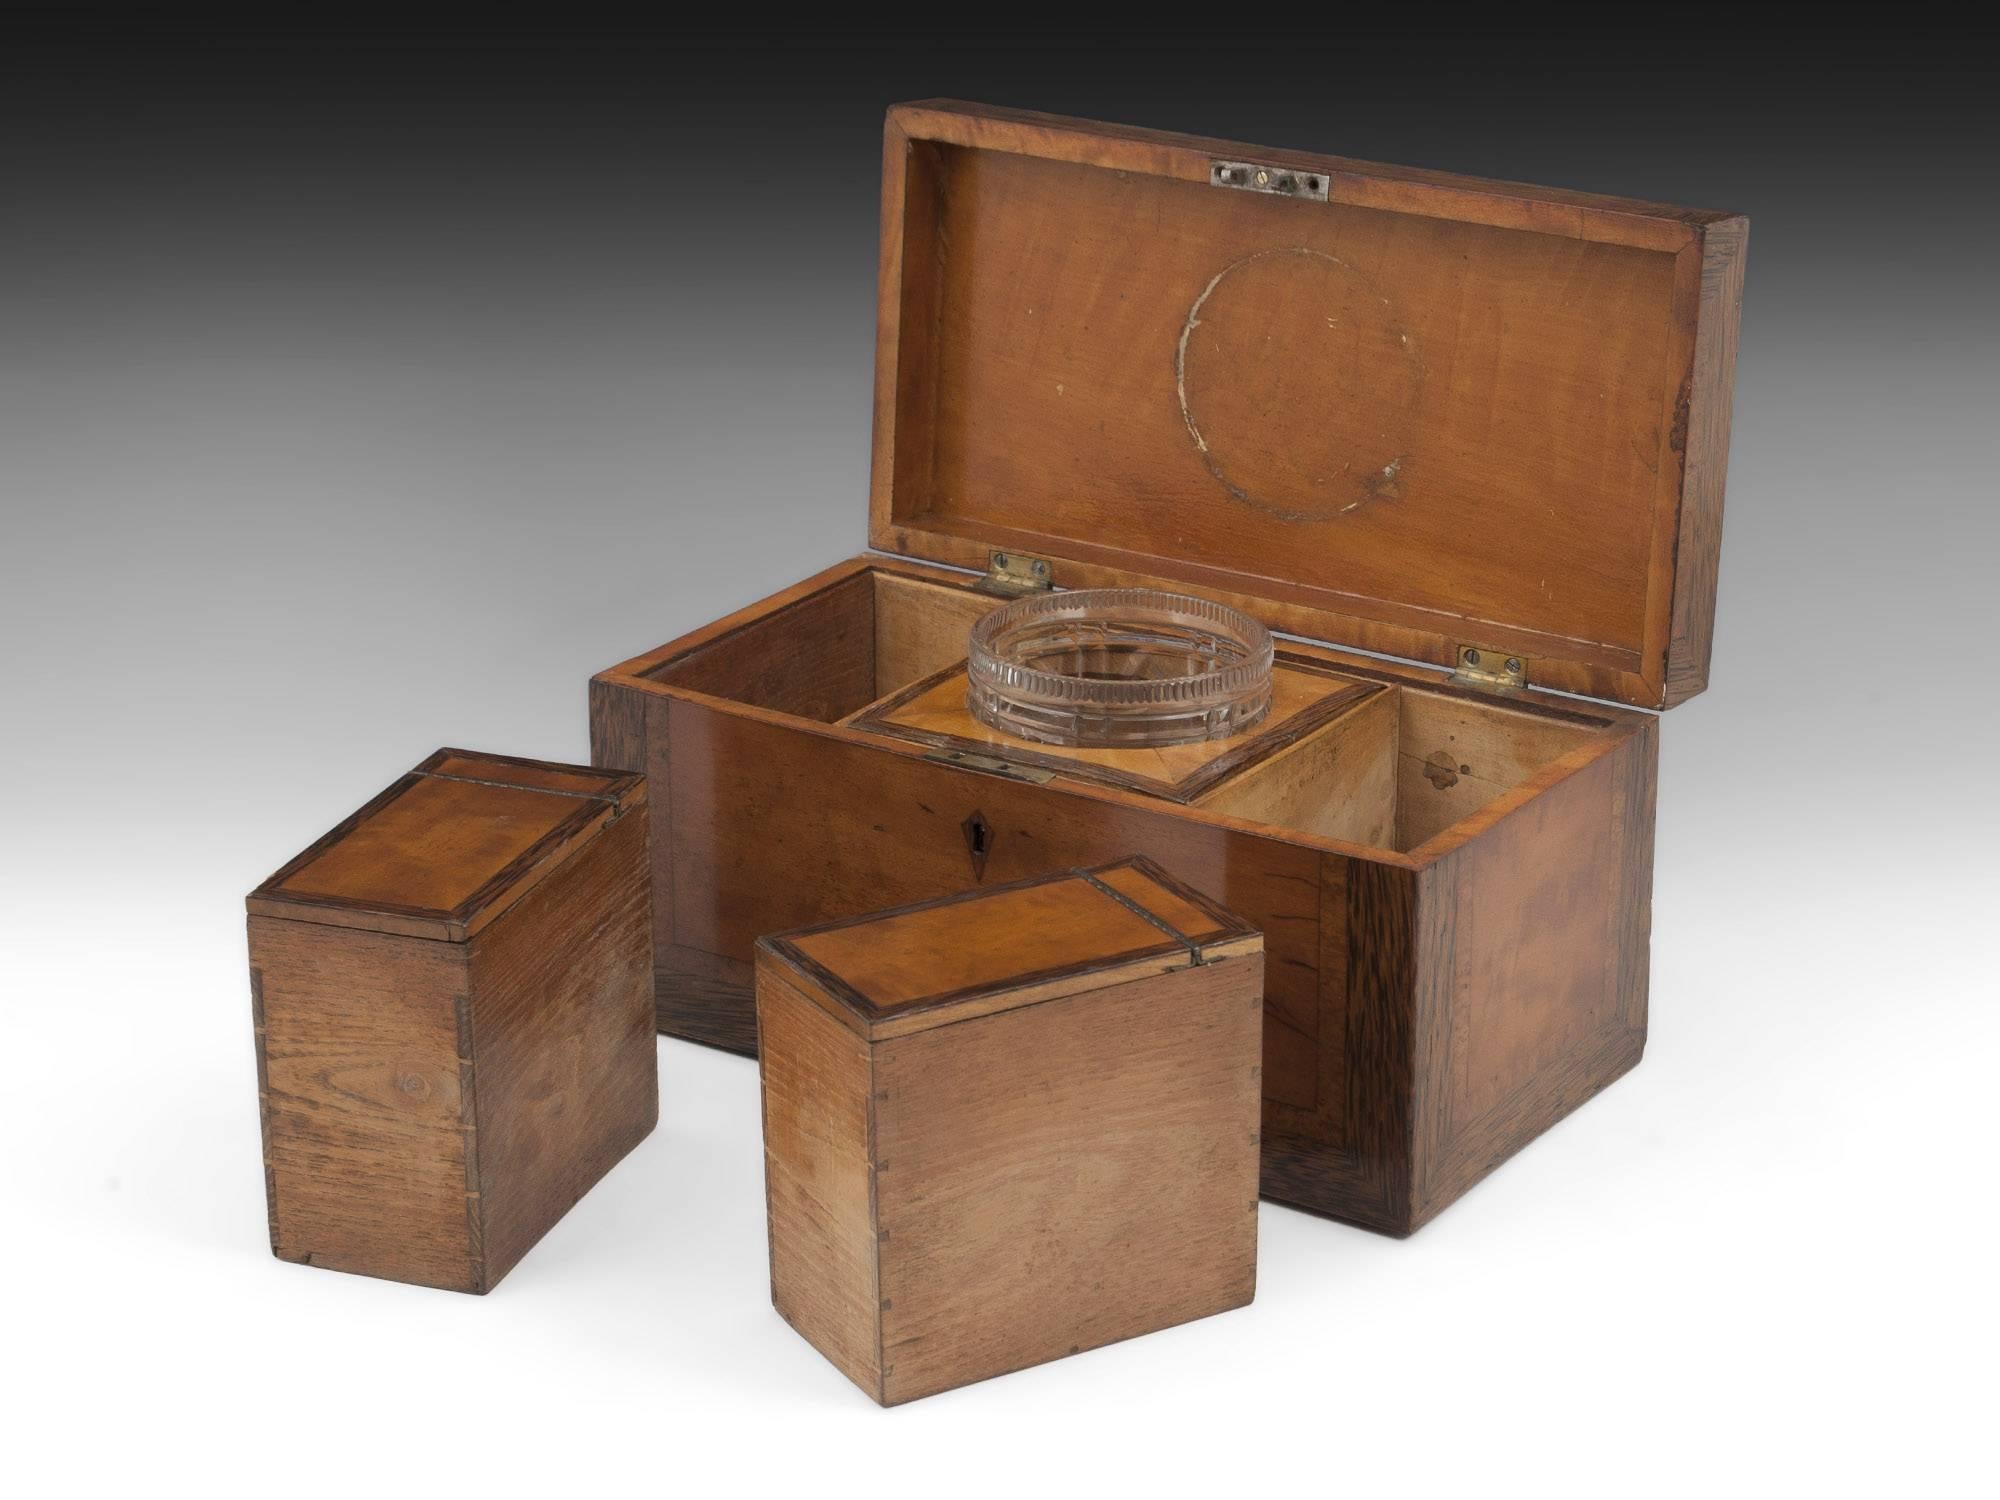 British Georgian Satinwood Tea Chest with Glass Tea Caddy Bowl, 19th Century For Sale